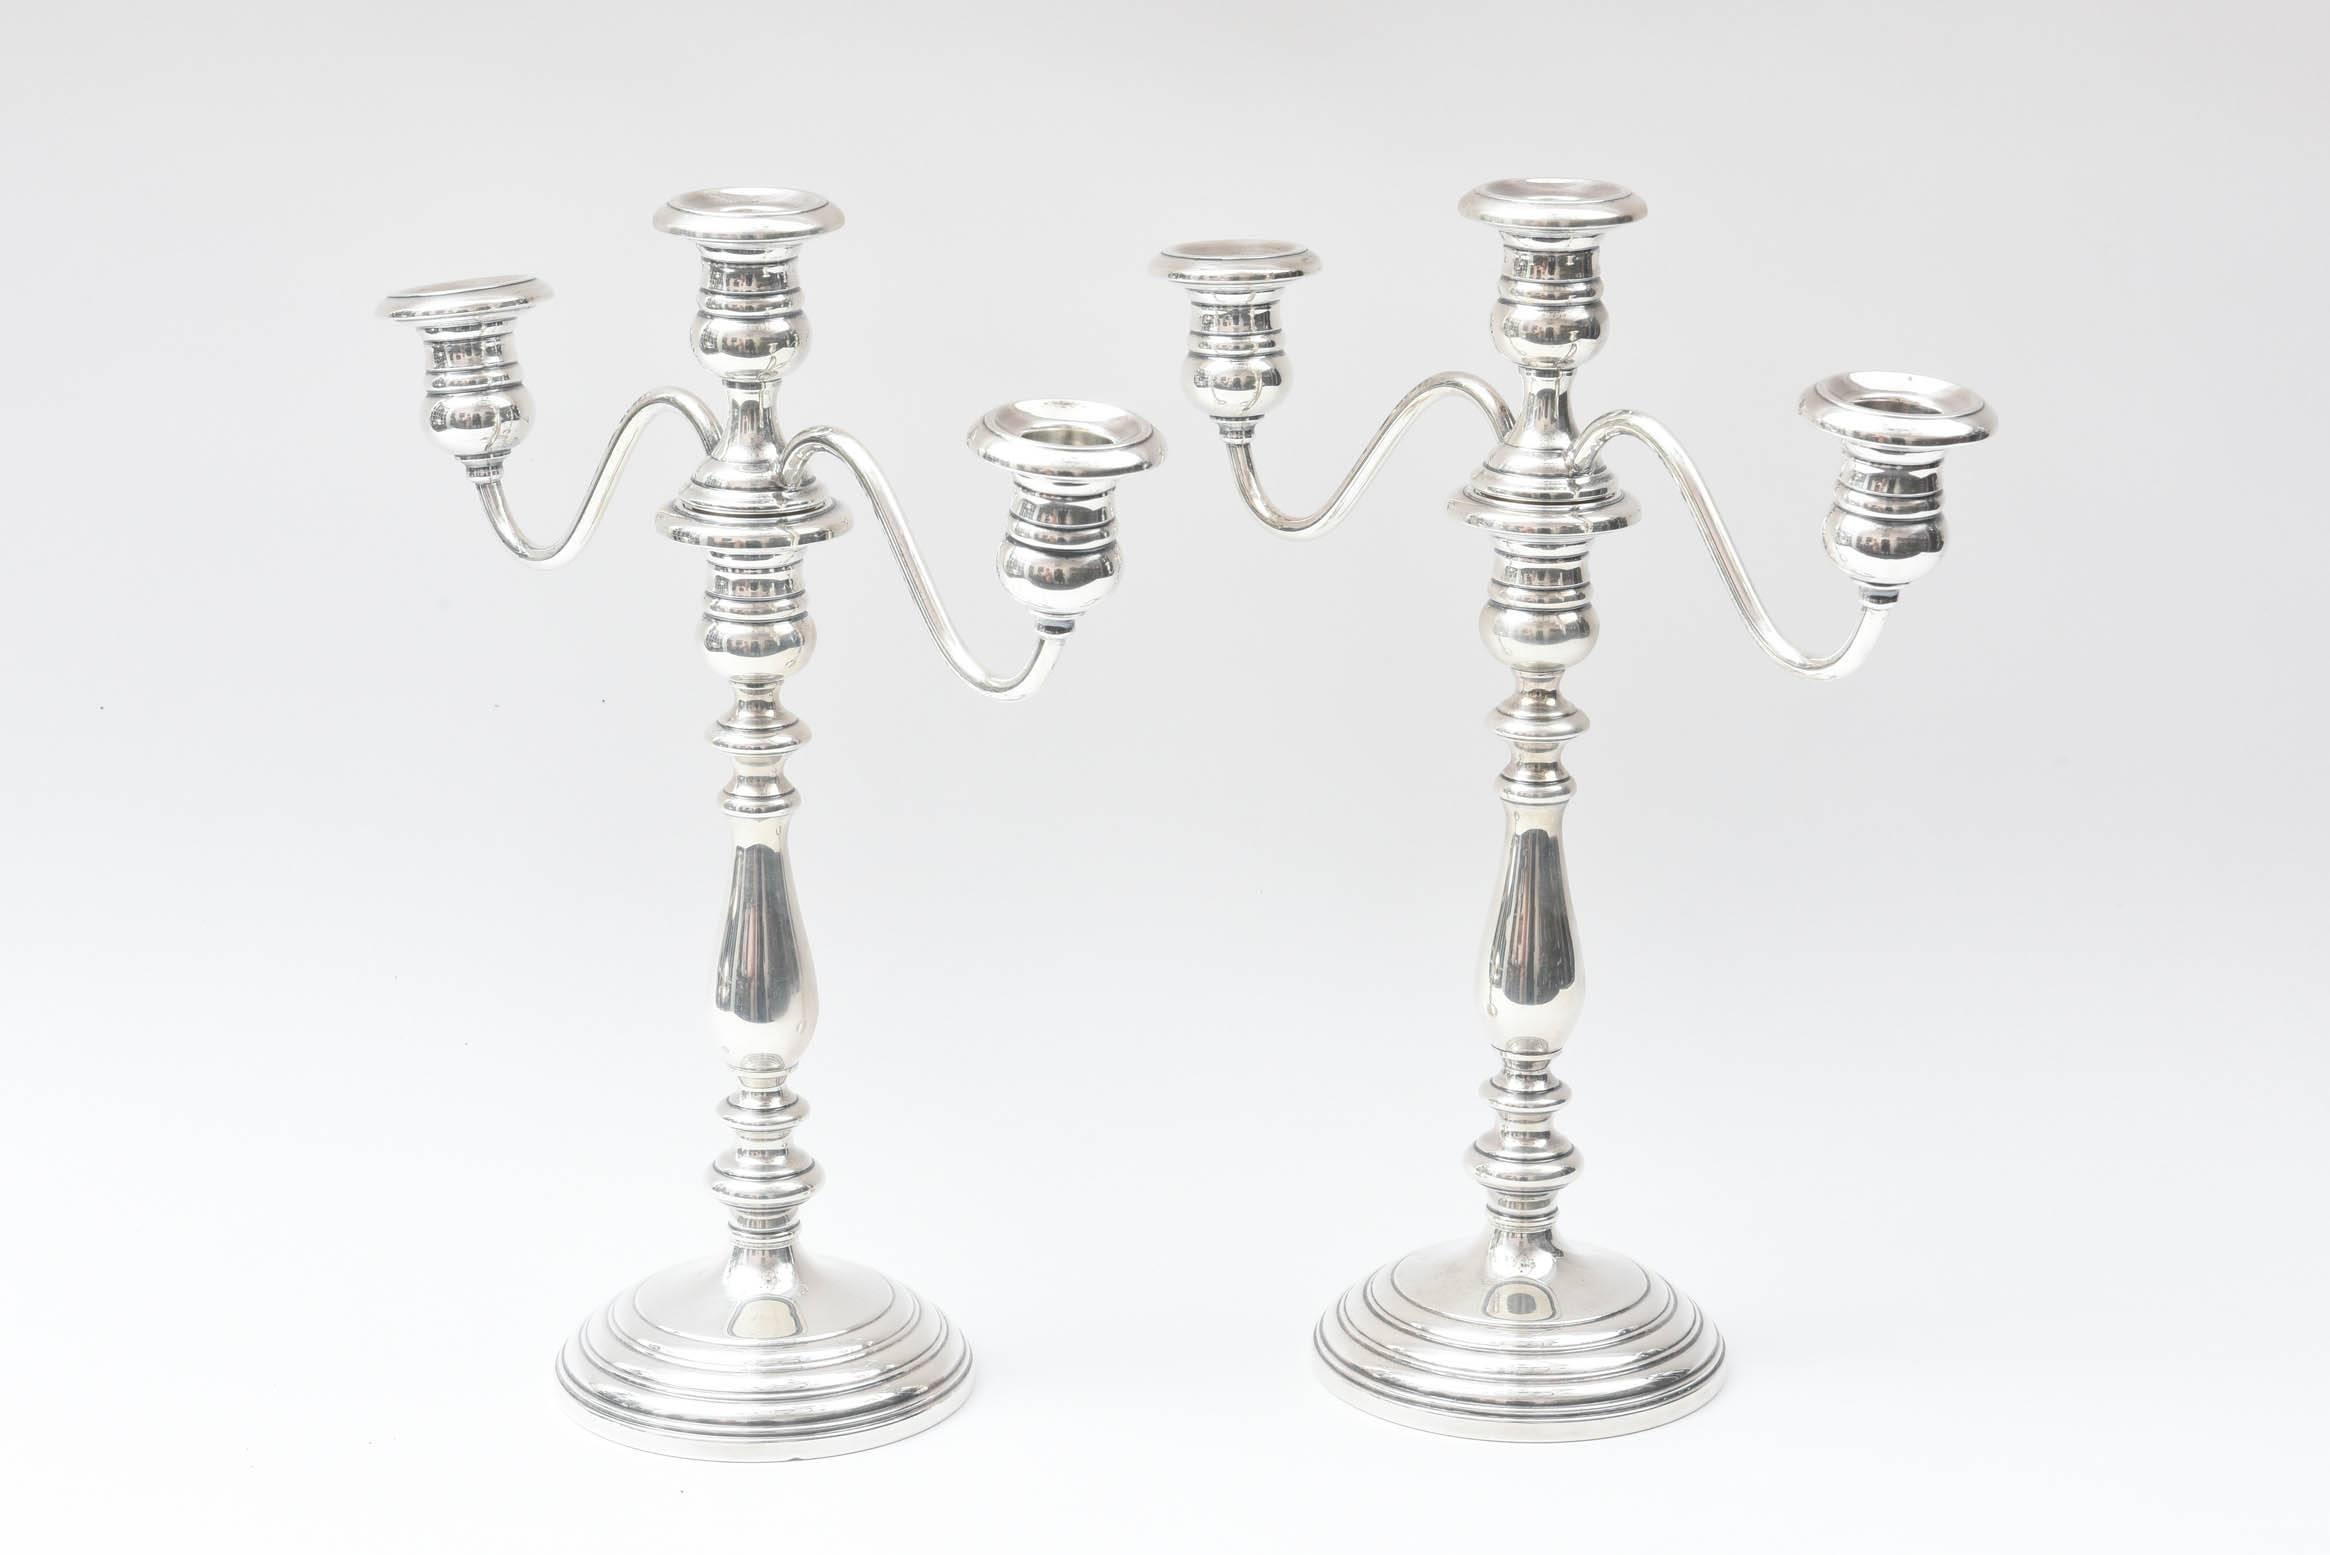 A classic set of candelabra from one of America's storied silver firms, Gorham. Nicely chased with removable arms to convert into a classic single candle stick. Wonderful vintage condition.
The base measures 4.5 inches
The candle stick when it is